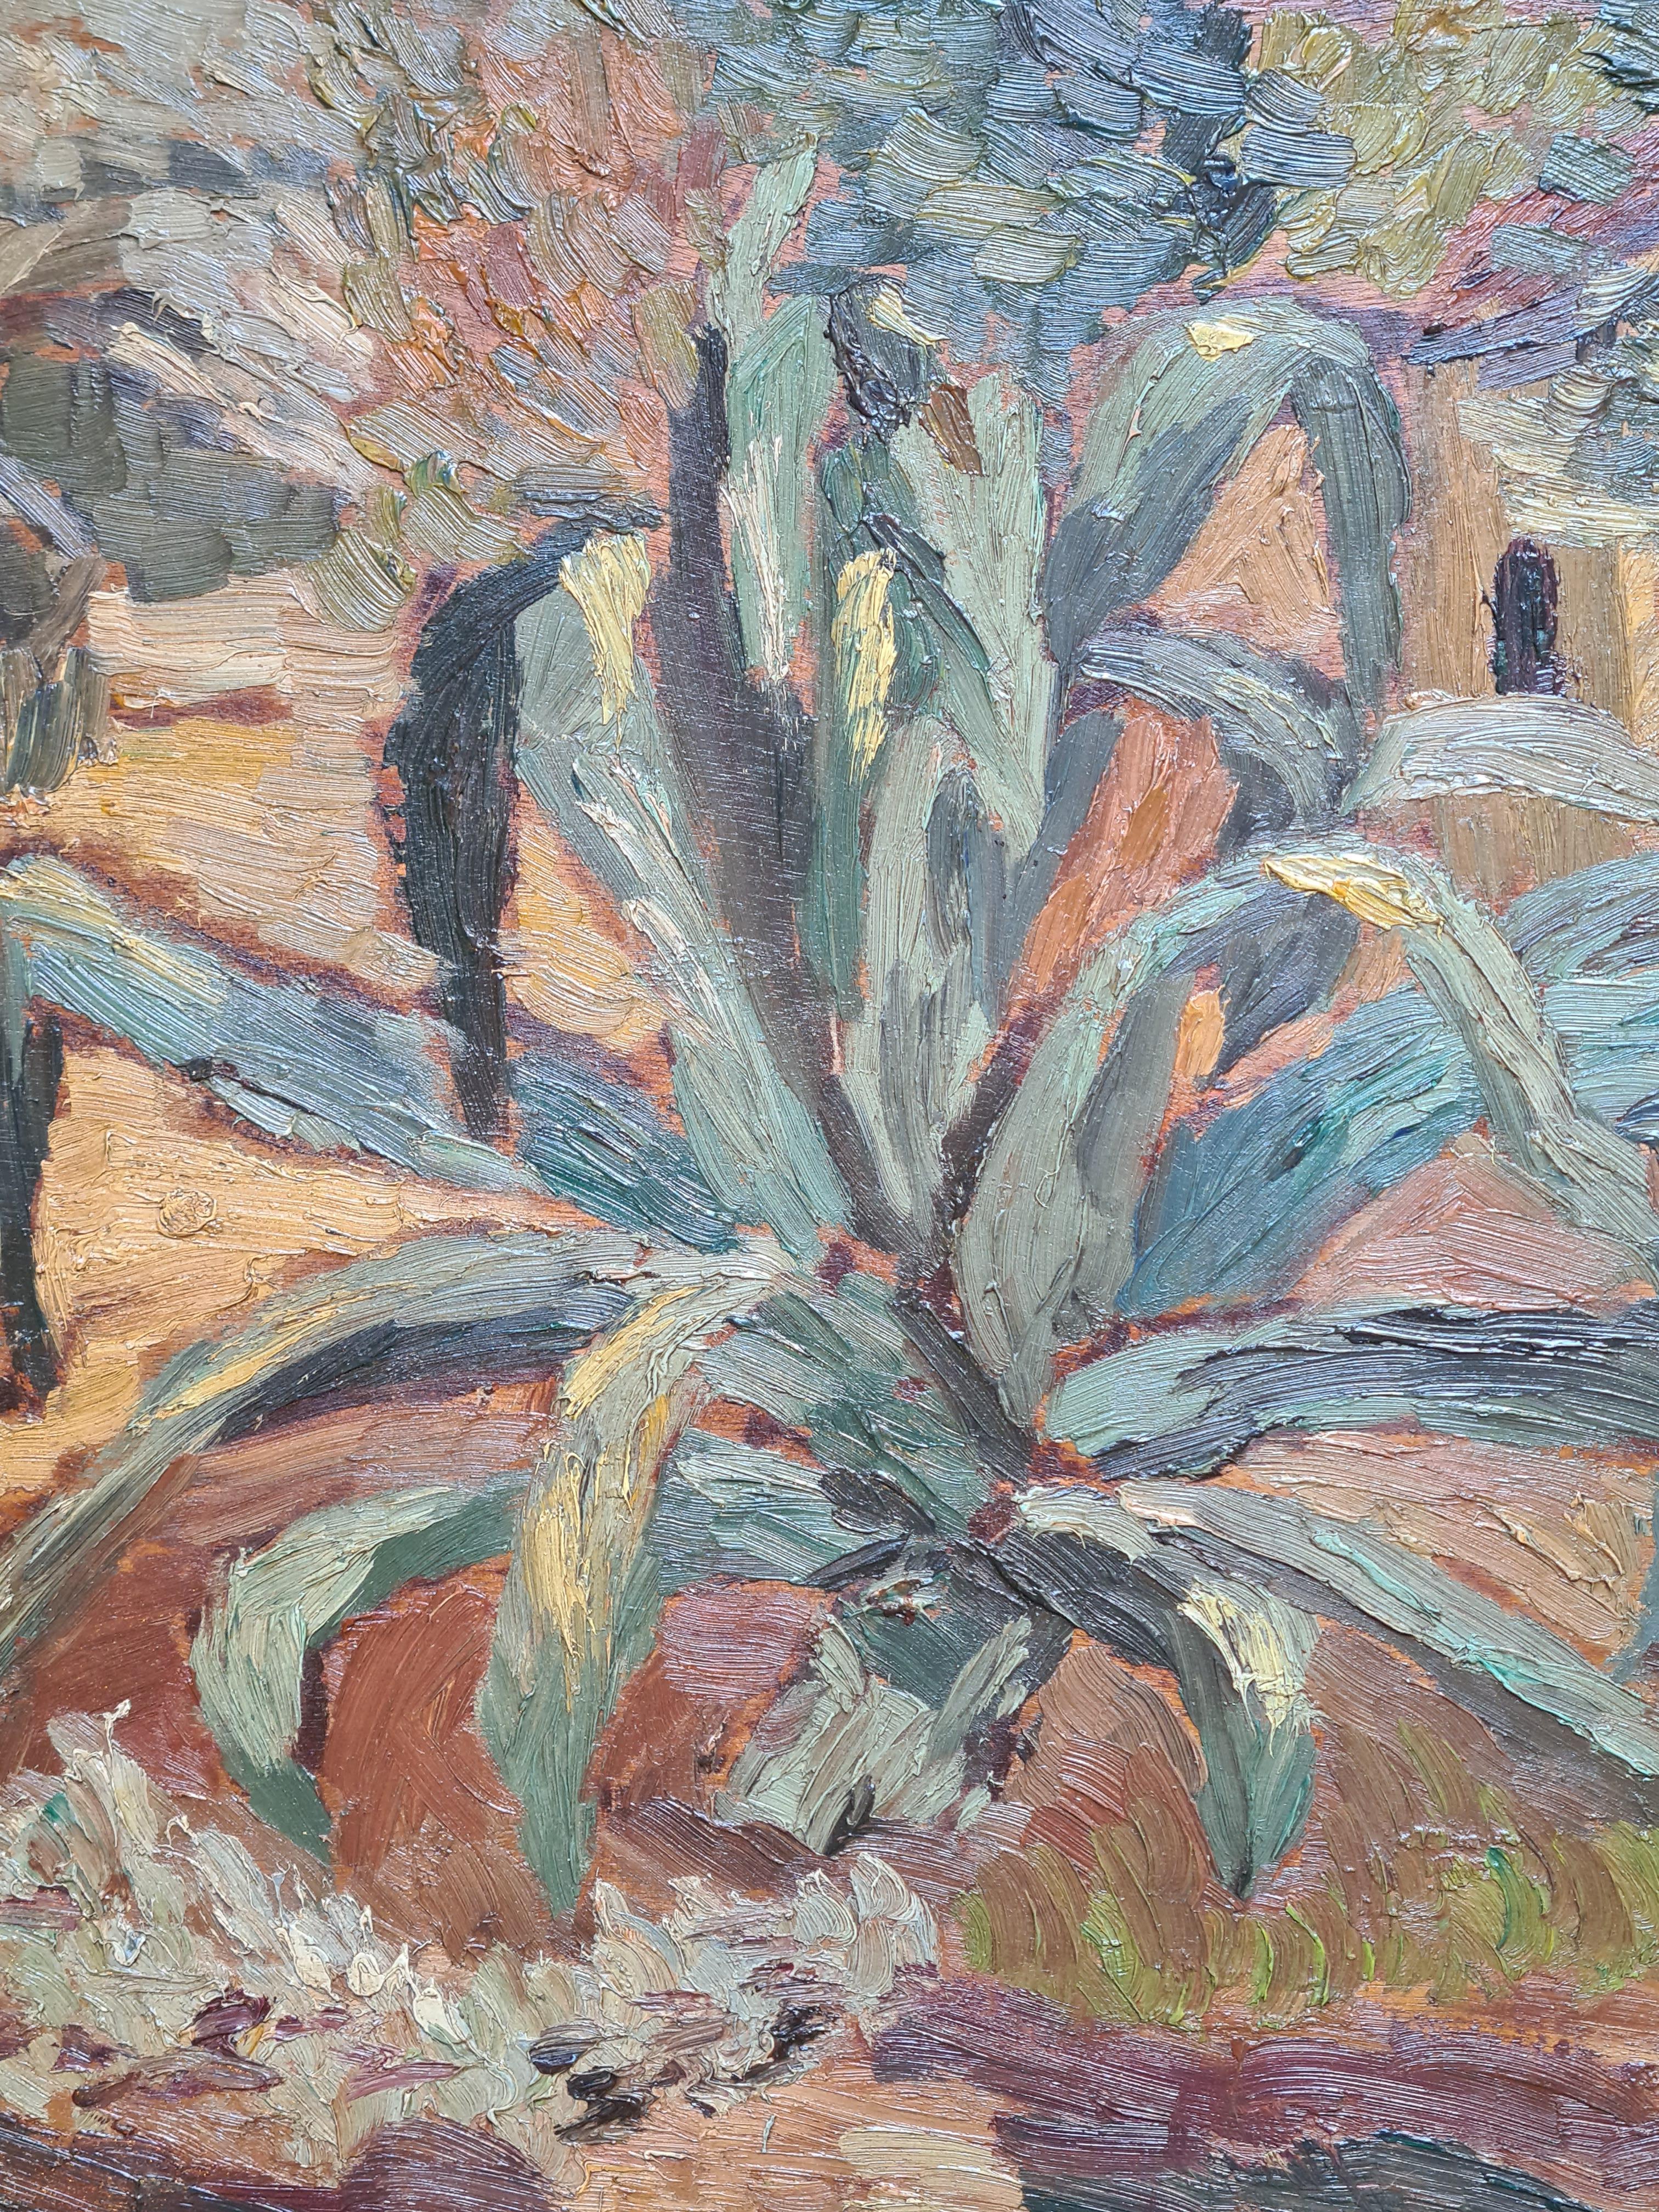 Oil on board study of a Blue Agave in its landscape by French artist Louis Michel Bernard. Signed bottom right and with atelier stamp to the rear of the panel. Presented in fine custom carved wood, gesso, silver leaf and patinated frame.

A charming